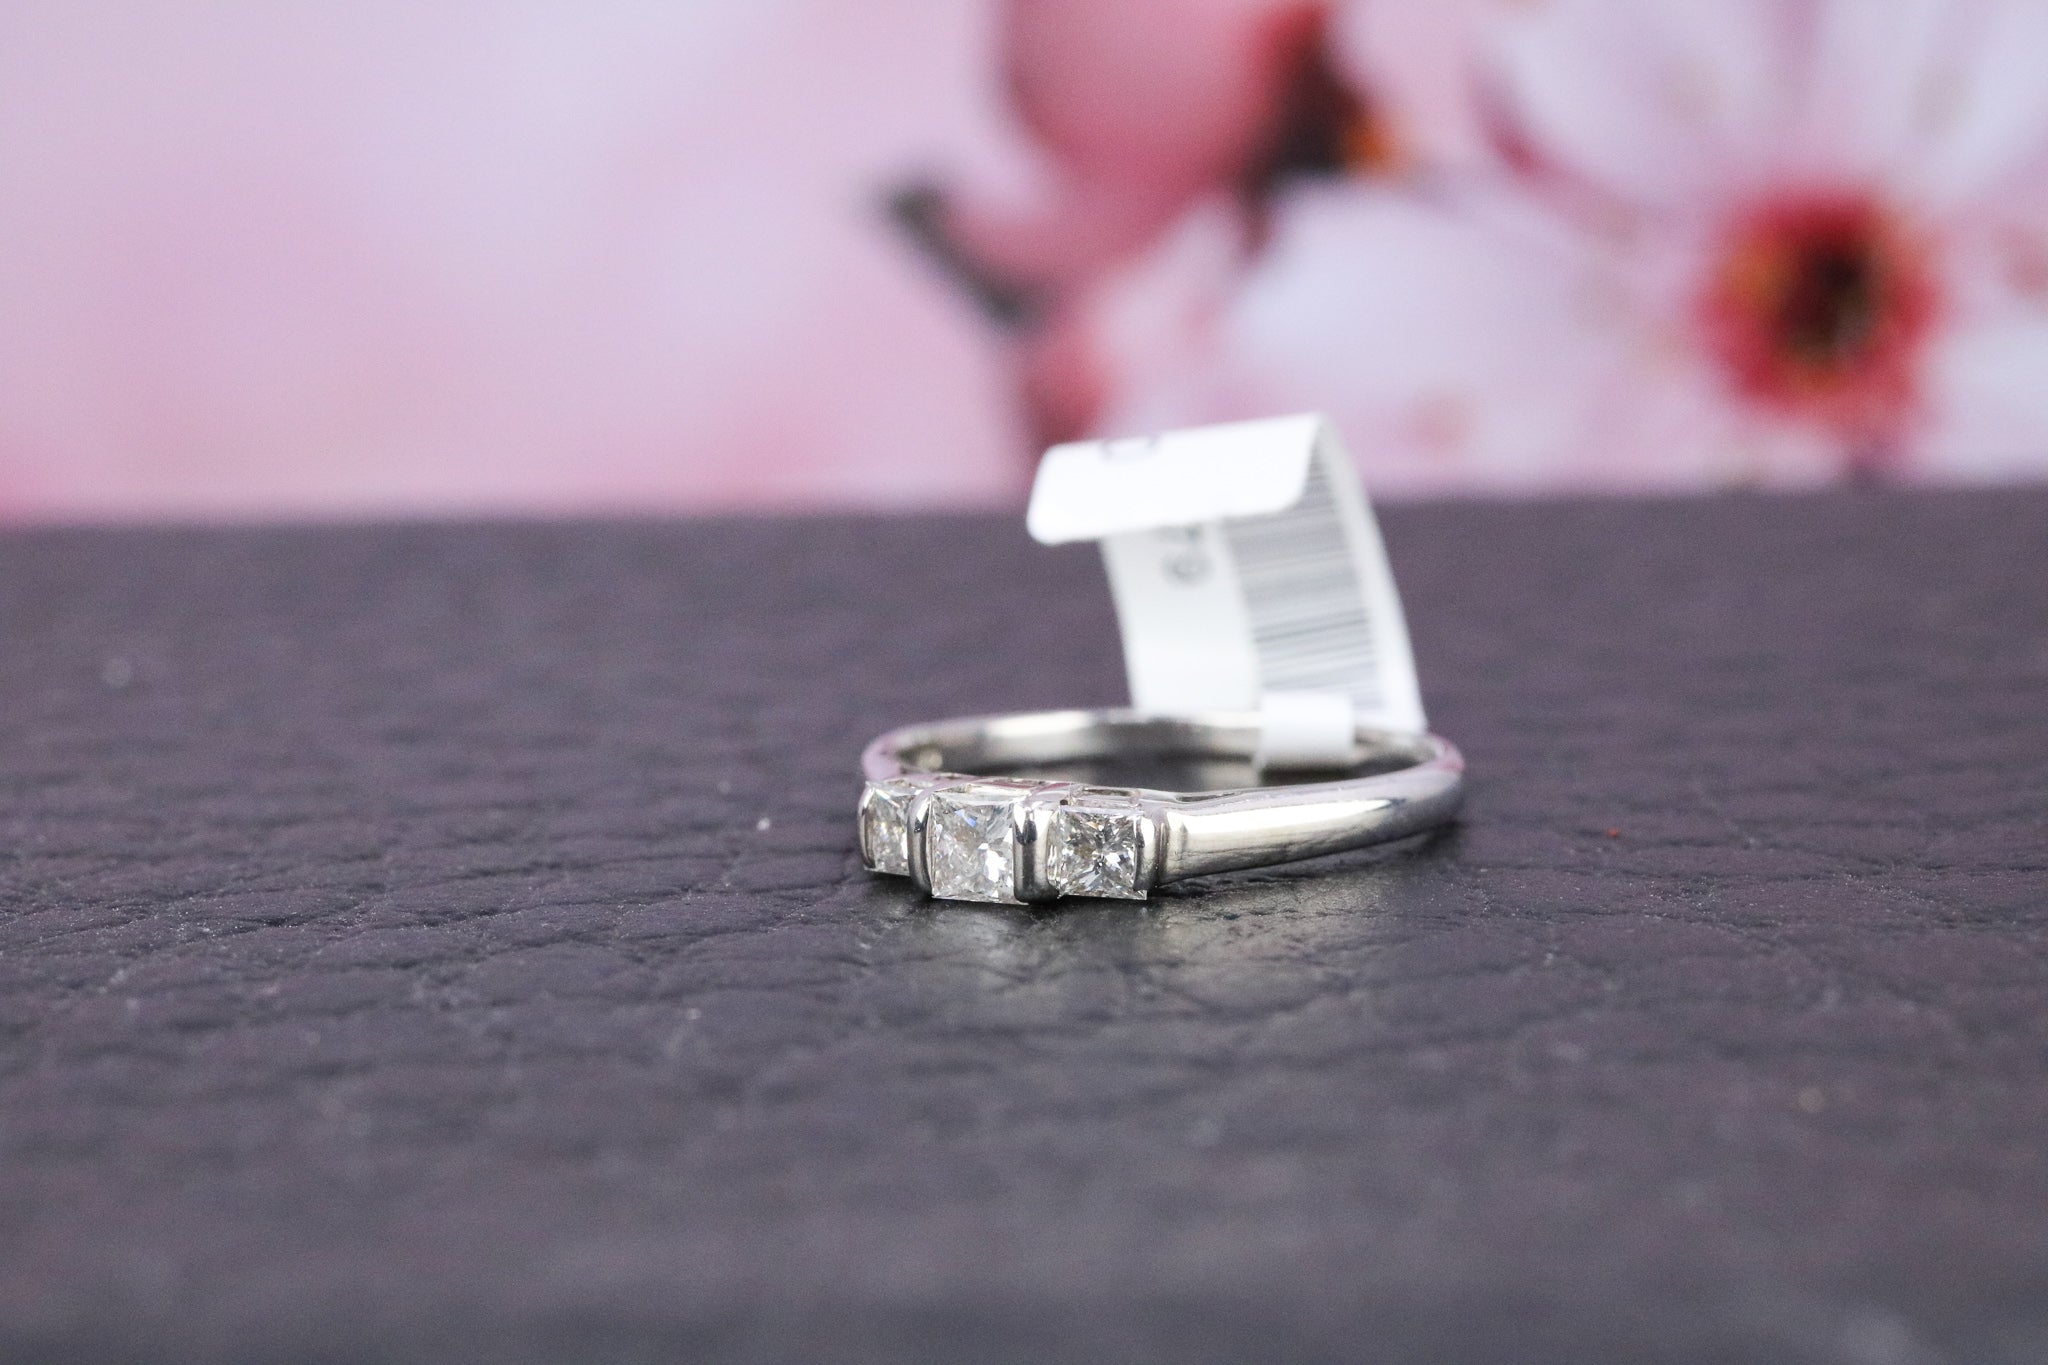 9ct White Gold Diamond Ring - HJ2279 - Hallmark Jewellers Formby & The Jewellers Bench Widnes